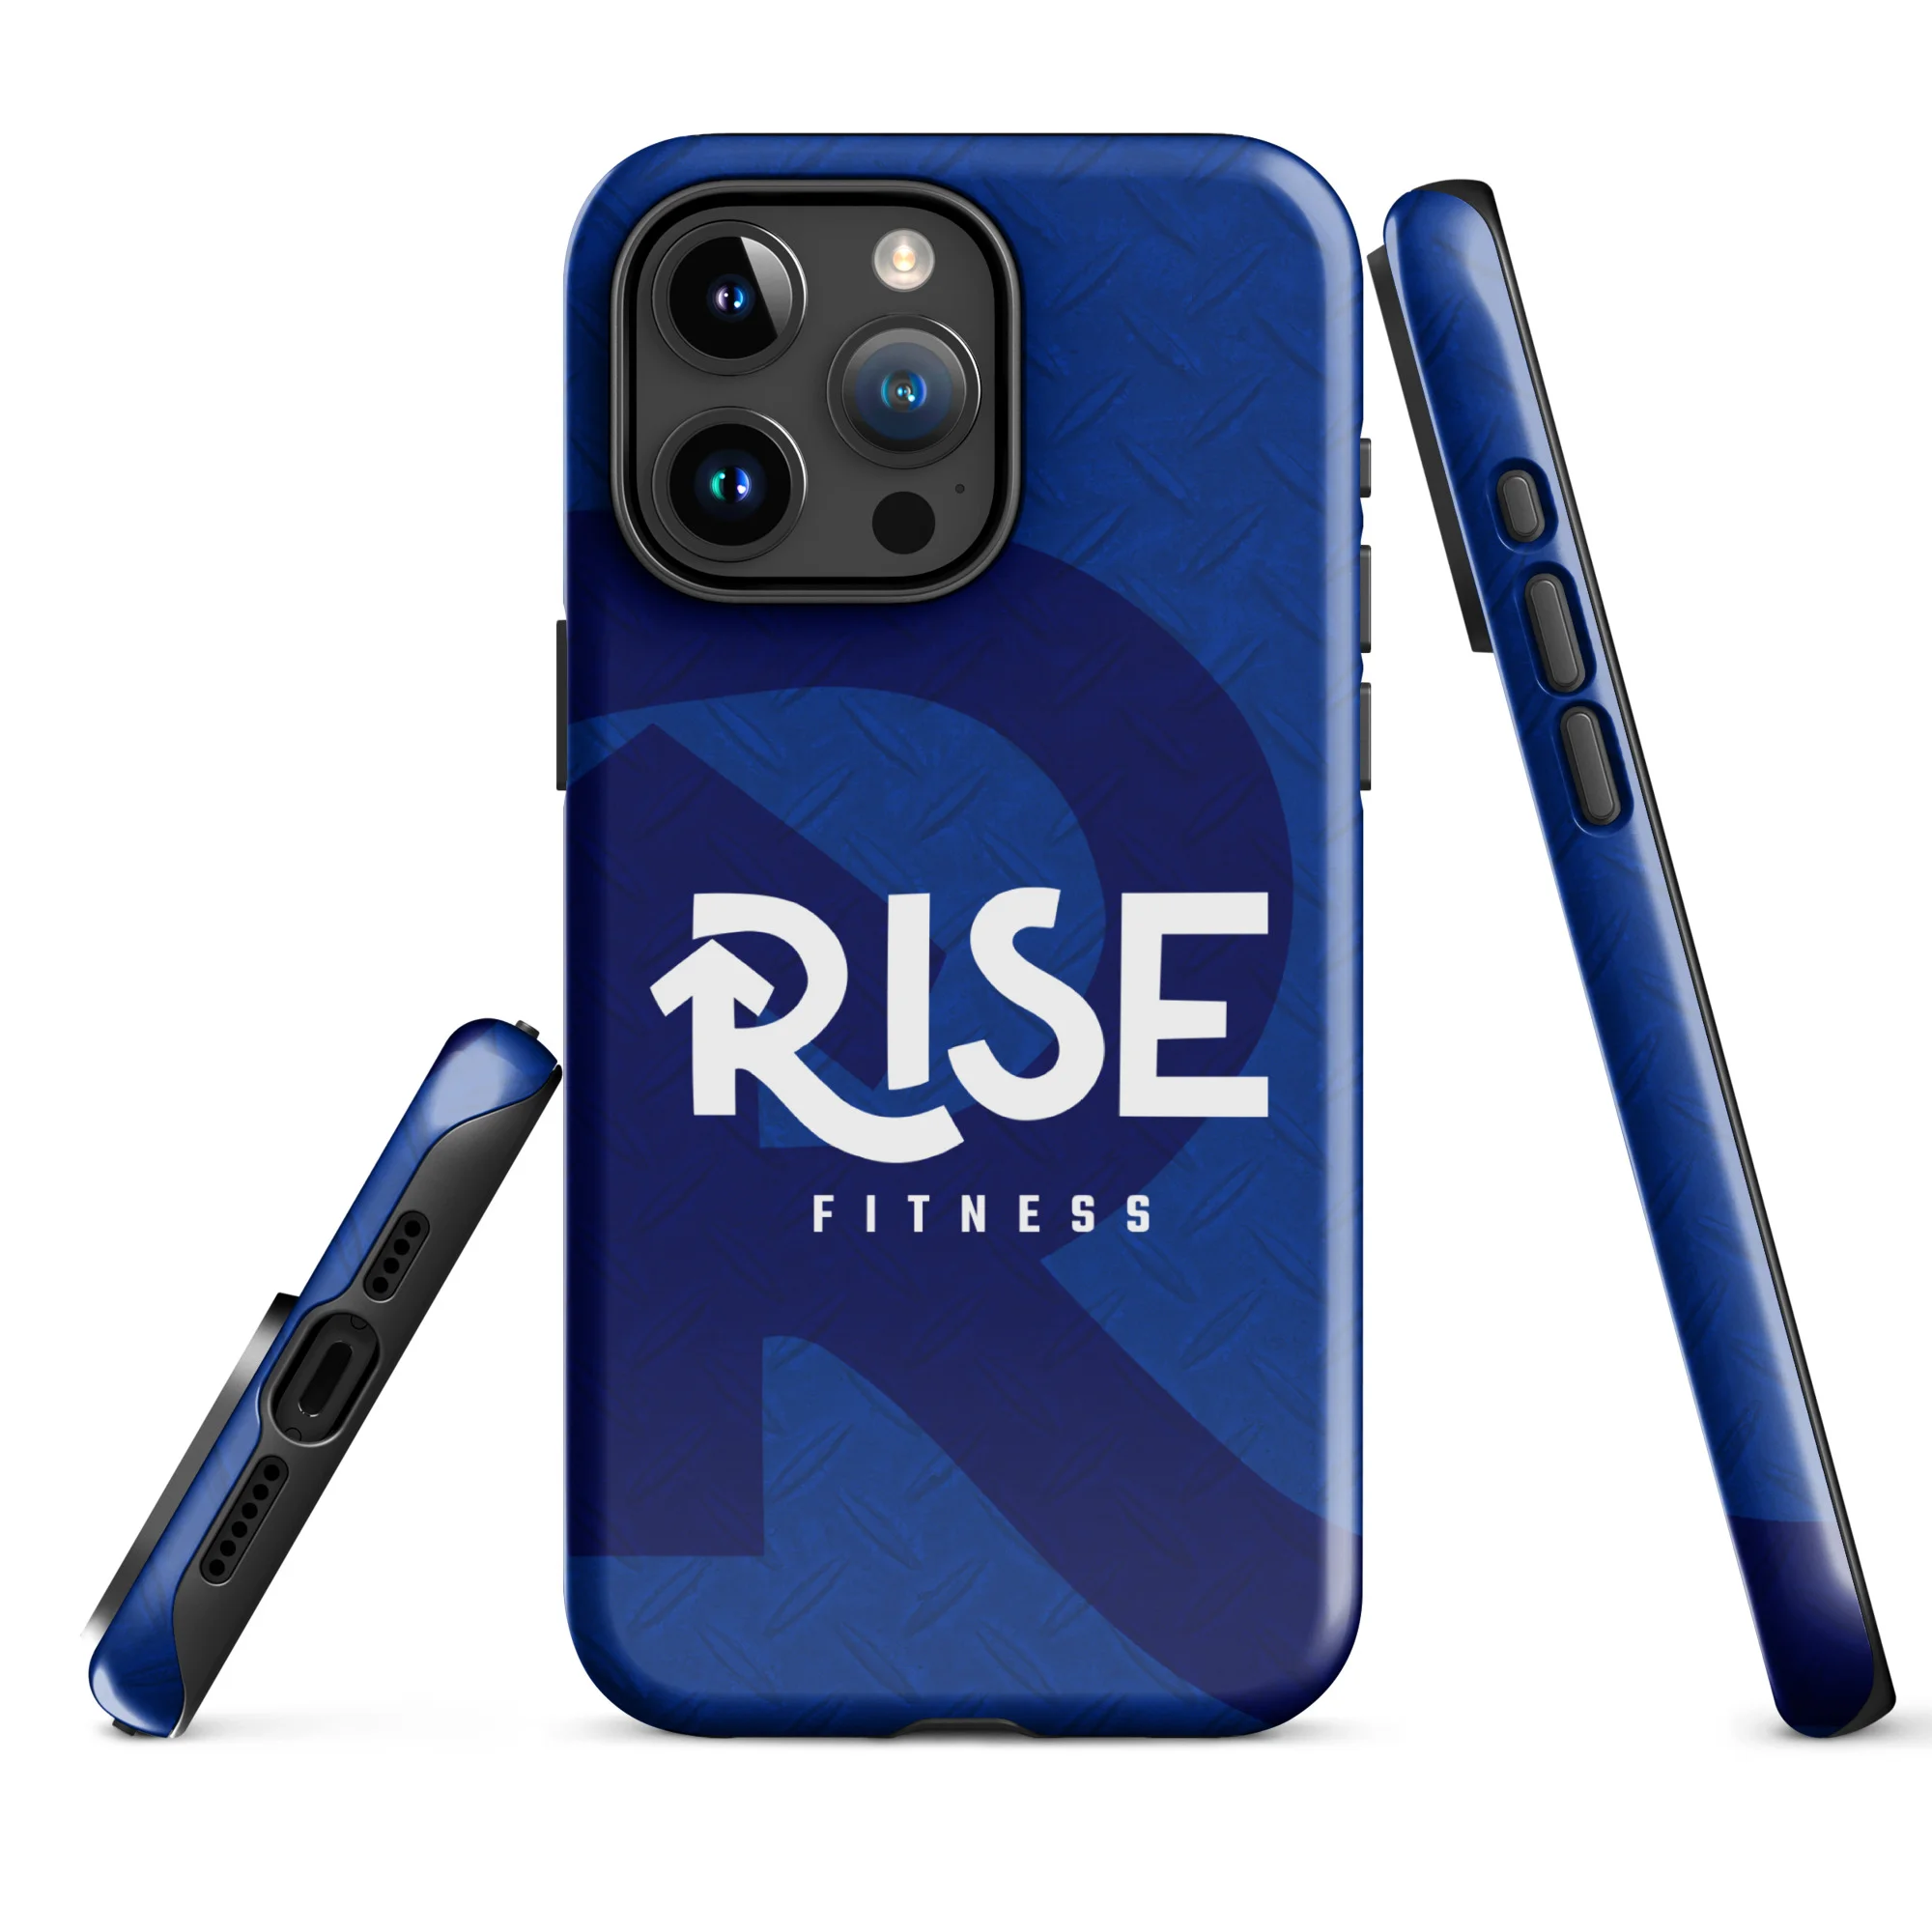 Product image for Rise Fitness iPhone Case (UK Blue)